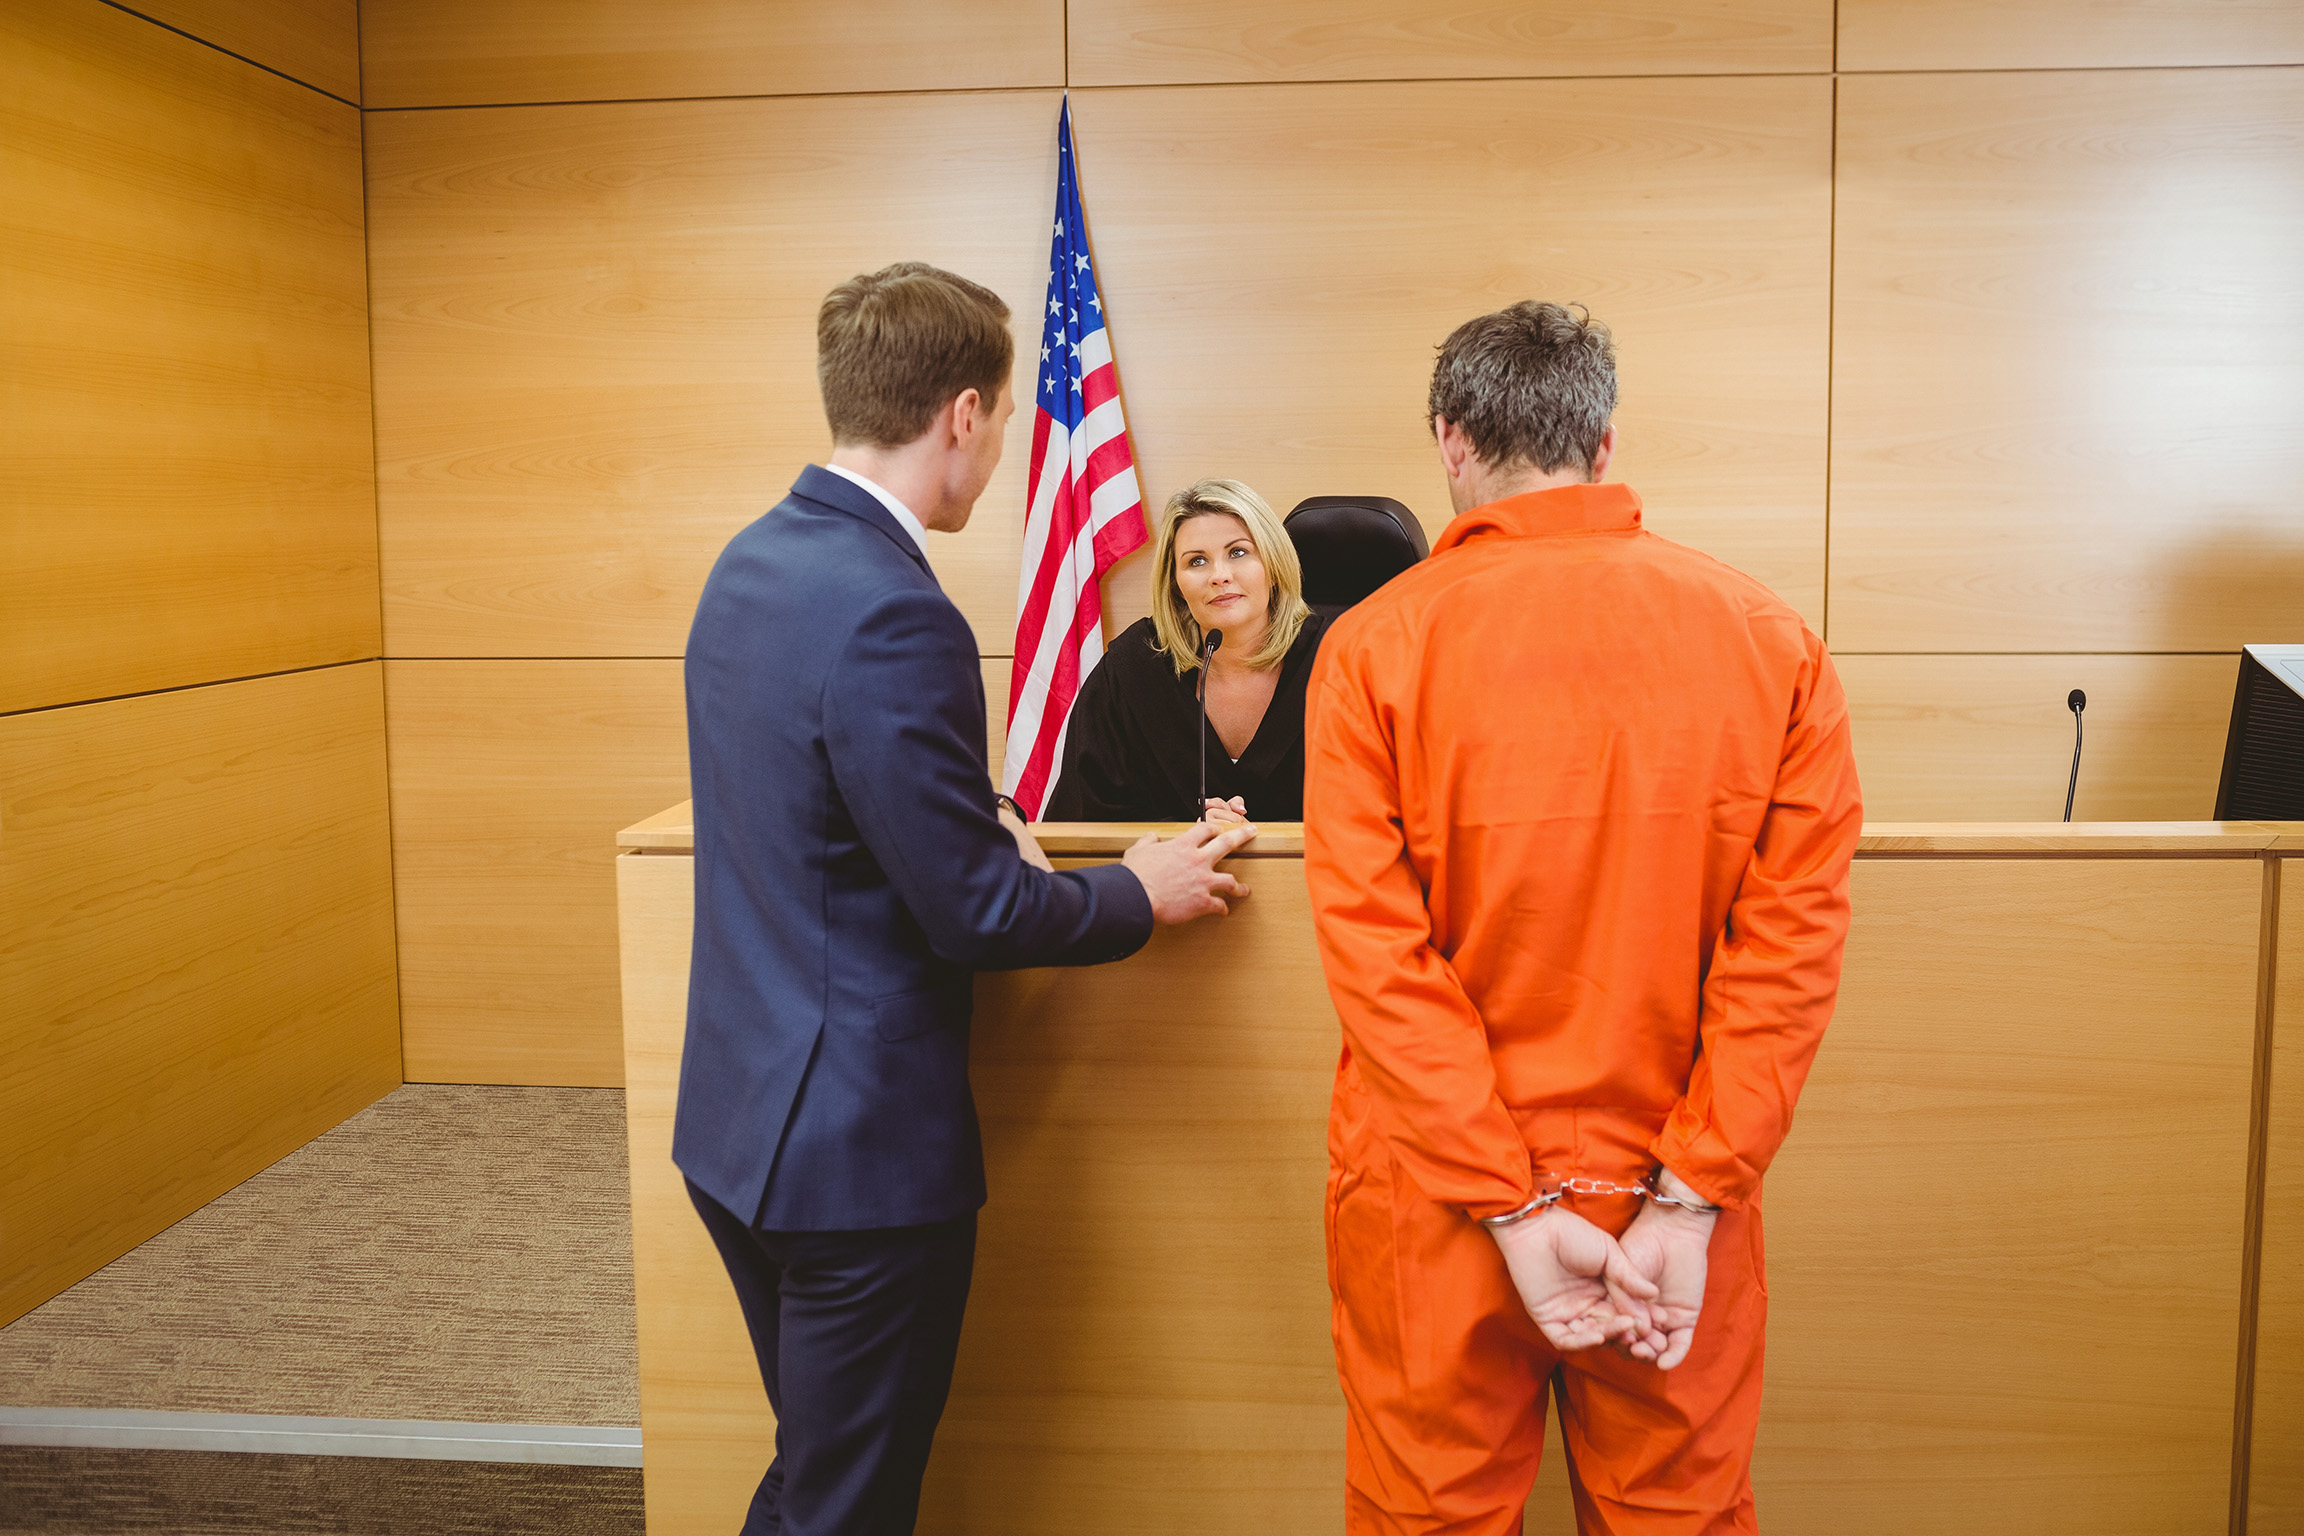 Criminal defense lawyer and detained criminal talking to female judge. At Henderson Legal Defense, LLC, we represent clients charged with a wide range of felony and misdemeanor crimes.